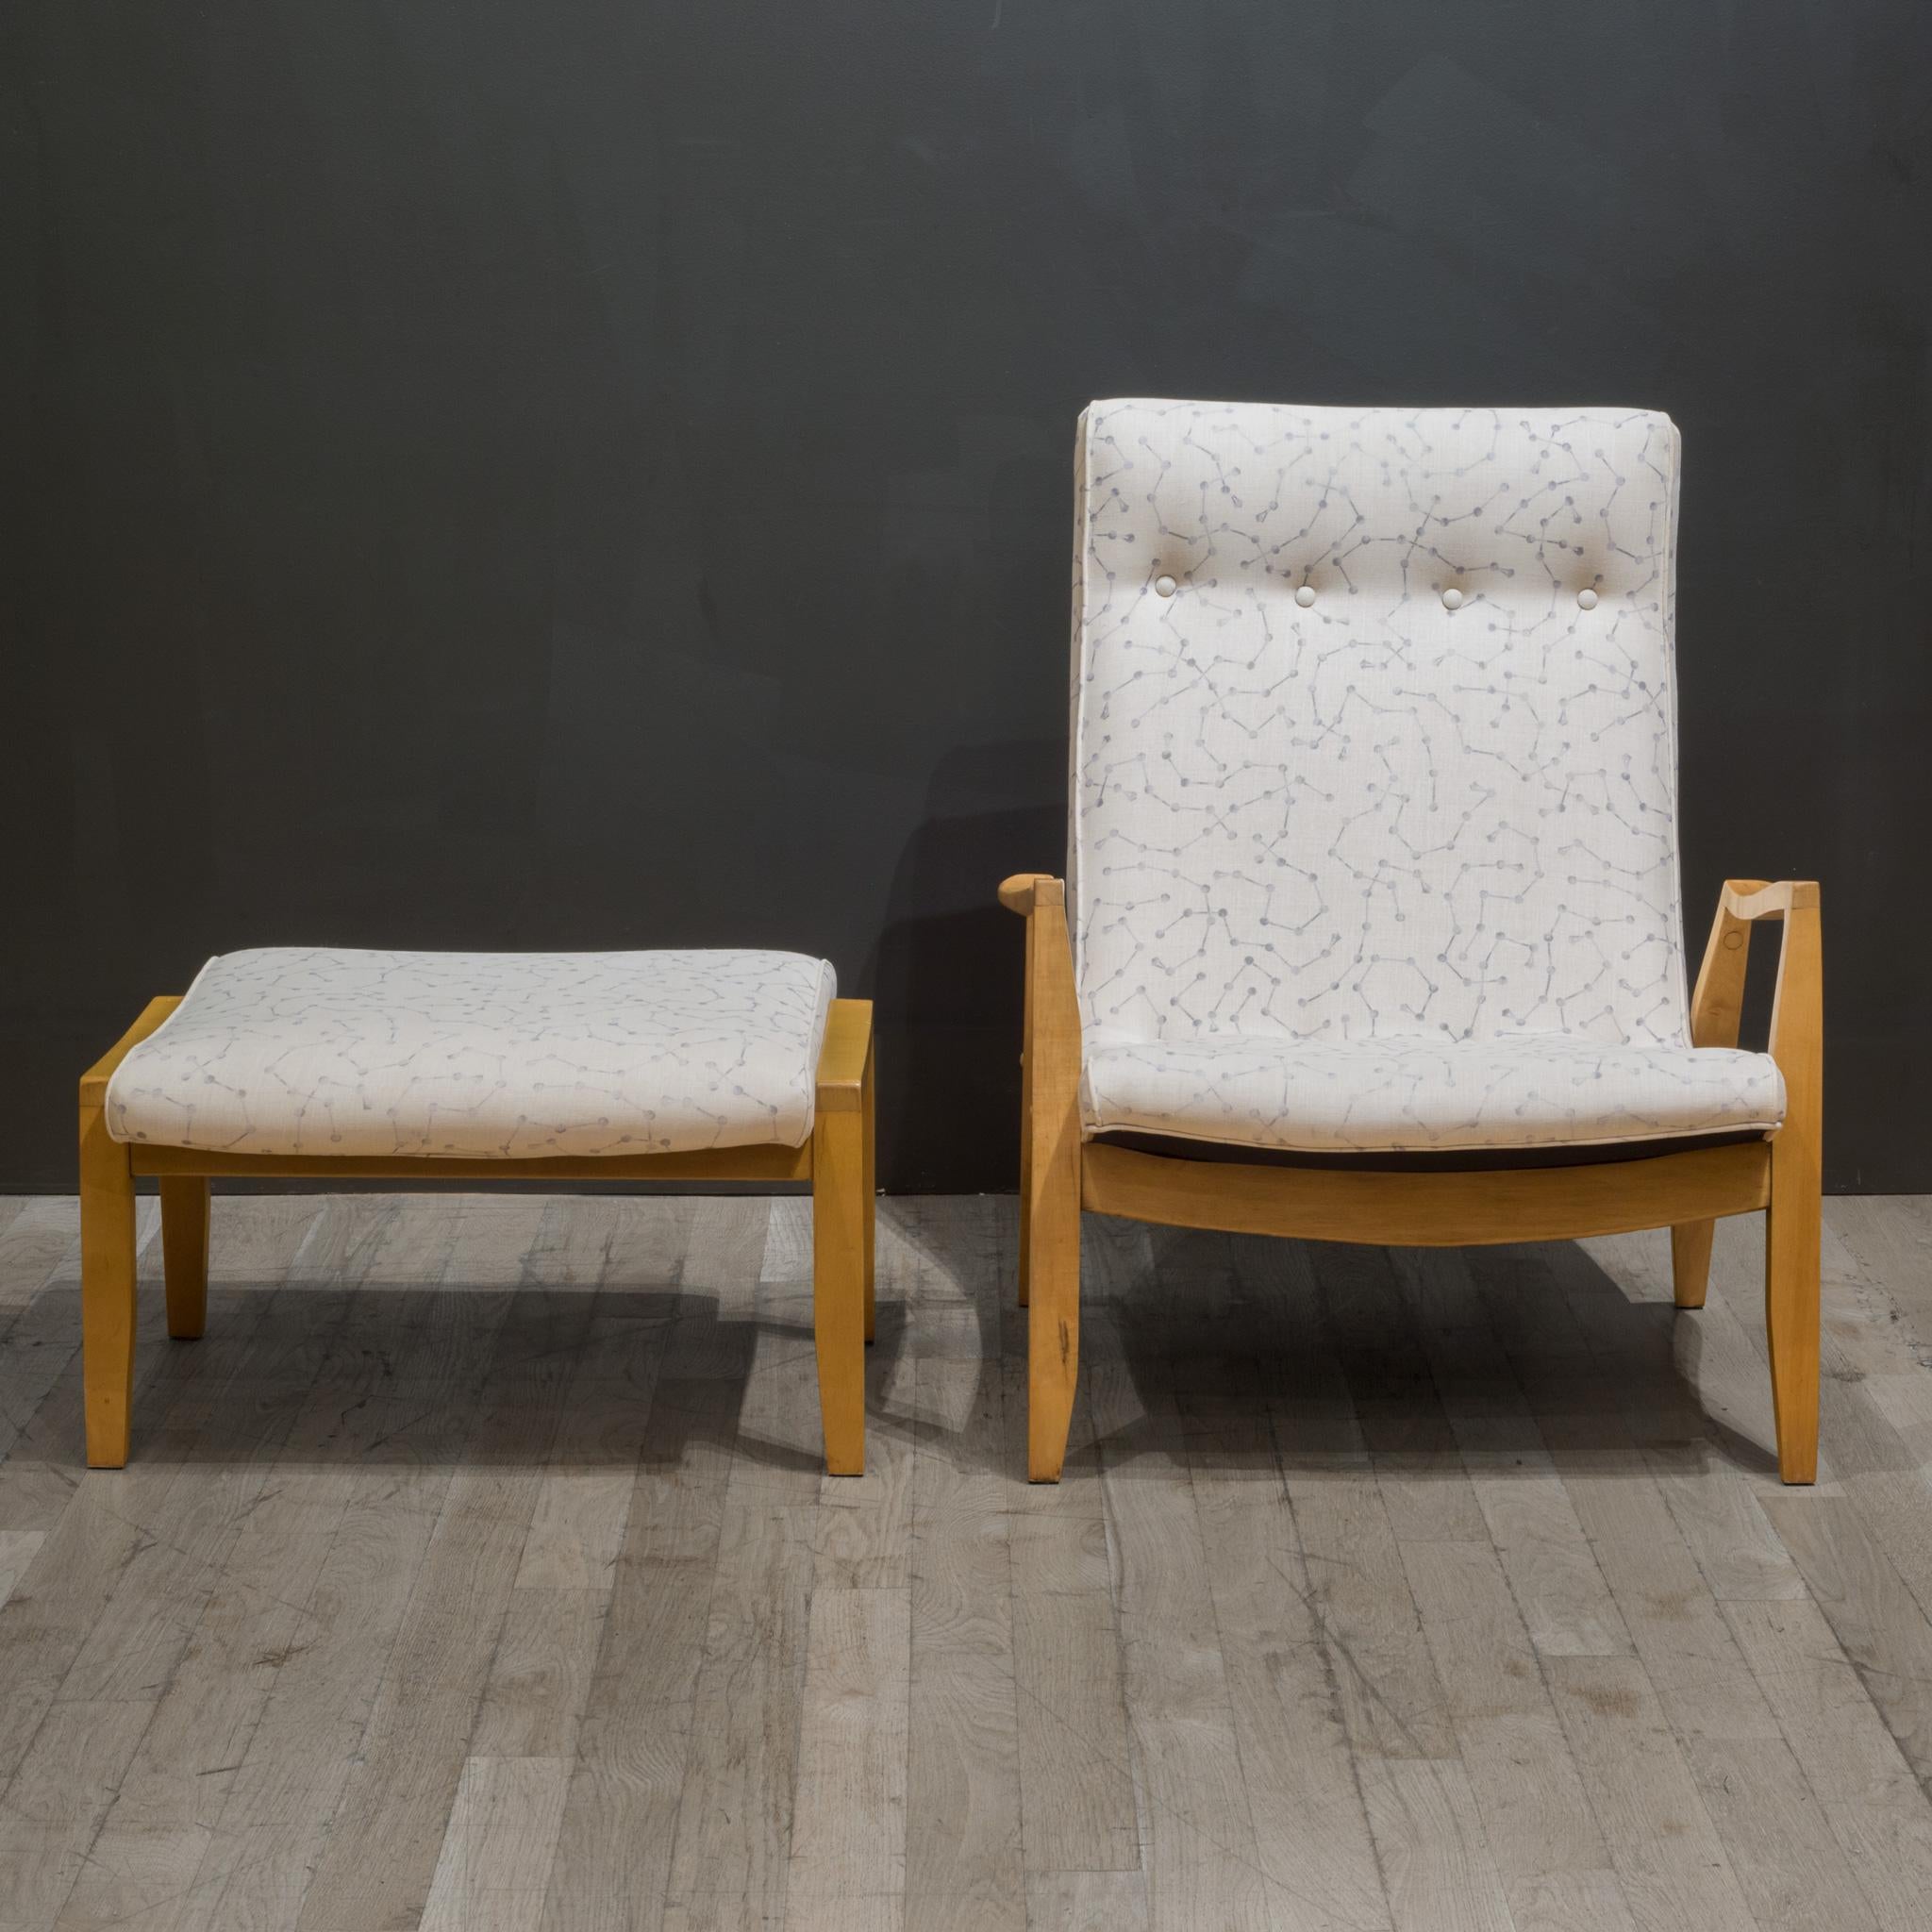 American Mid-Century Milo Baughman Scoop Lounge Chair and Ottoman, C.1950-1960 For Sale